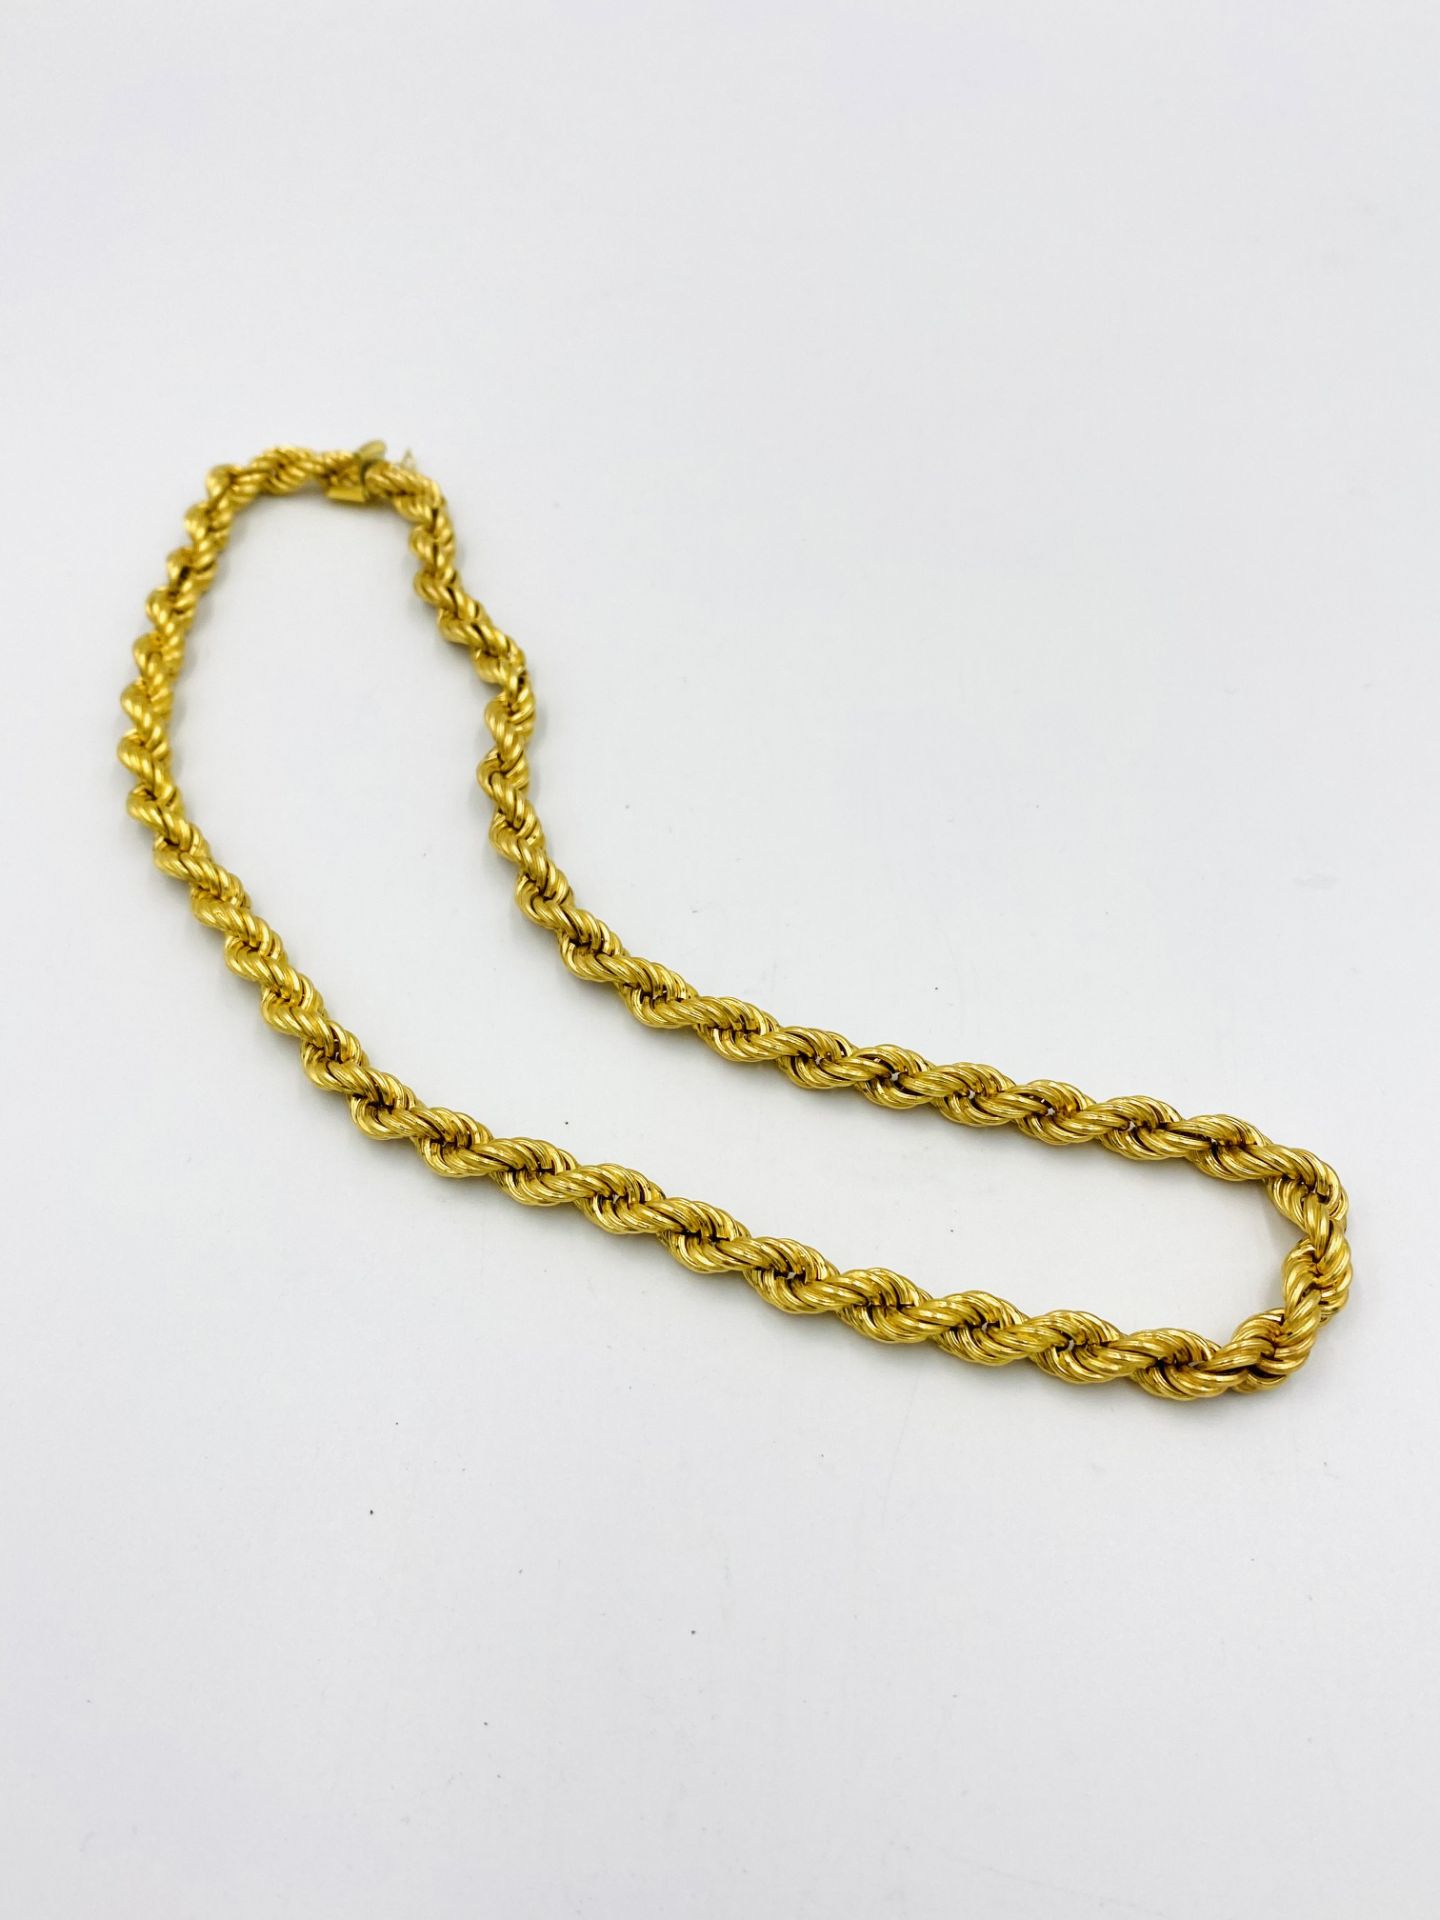 18ct gold rope twist necklace - Image 4 of 5